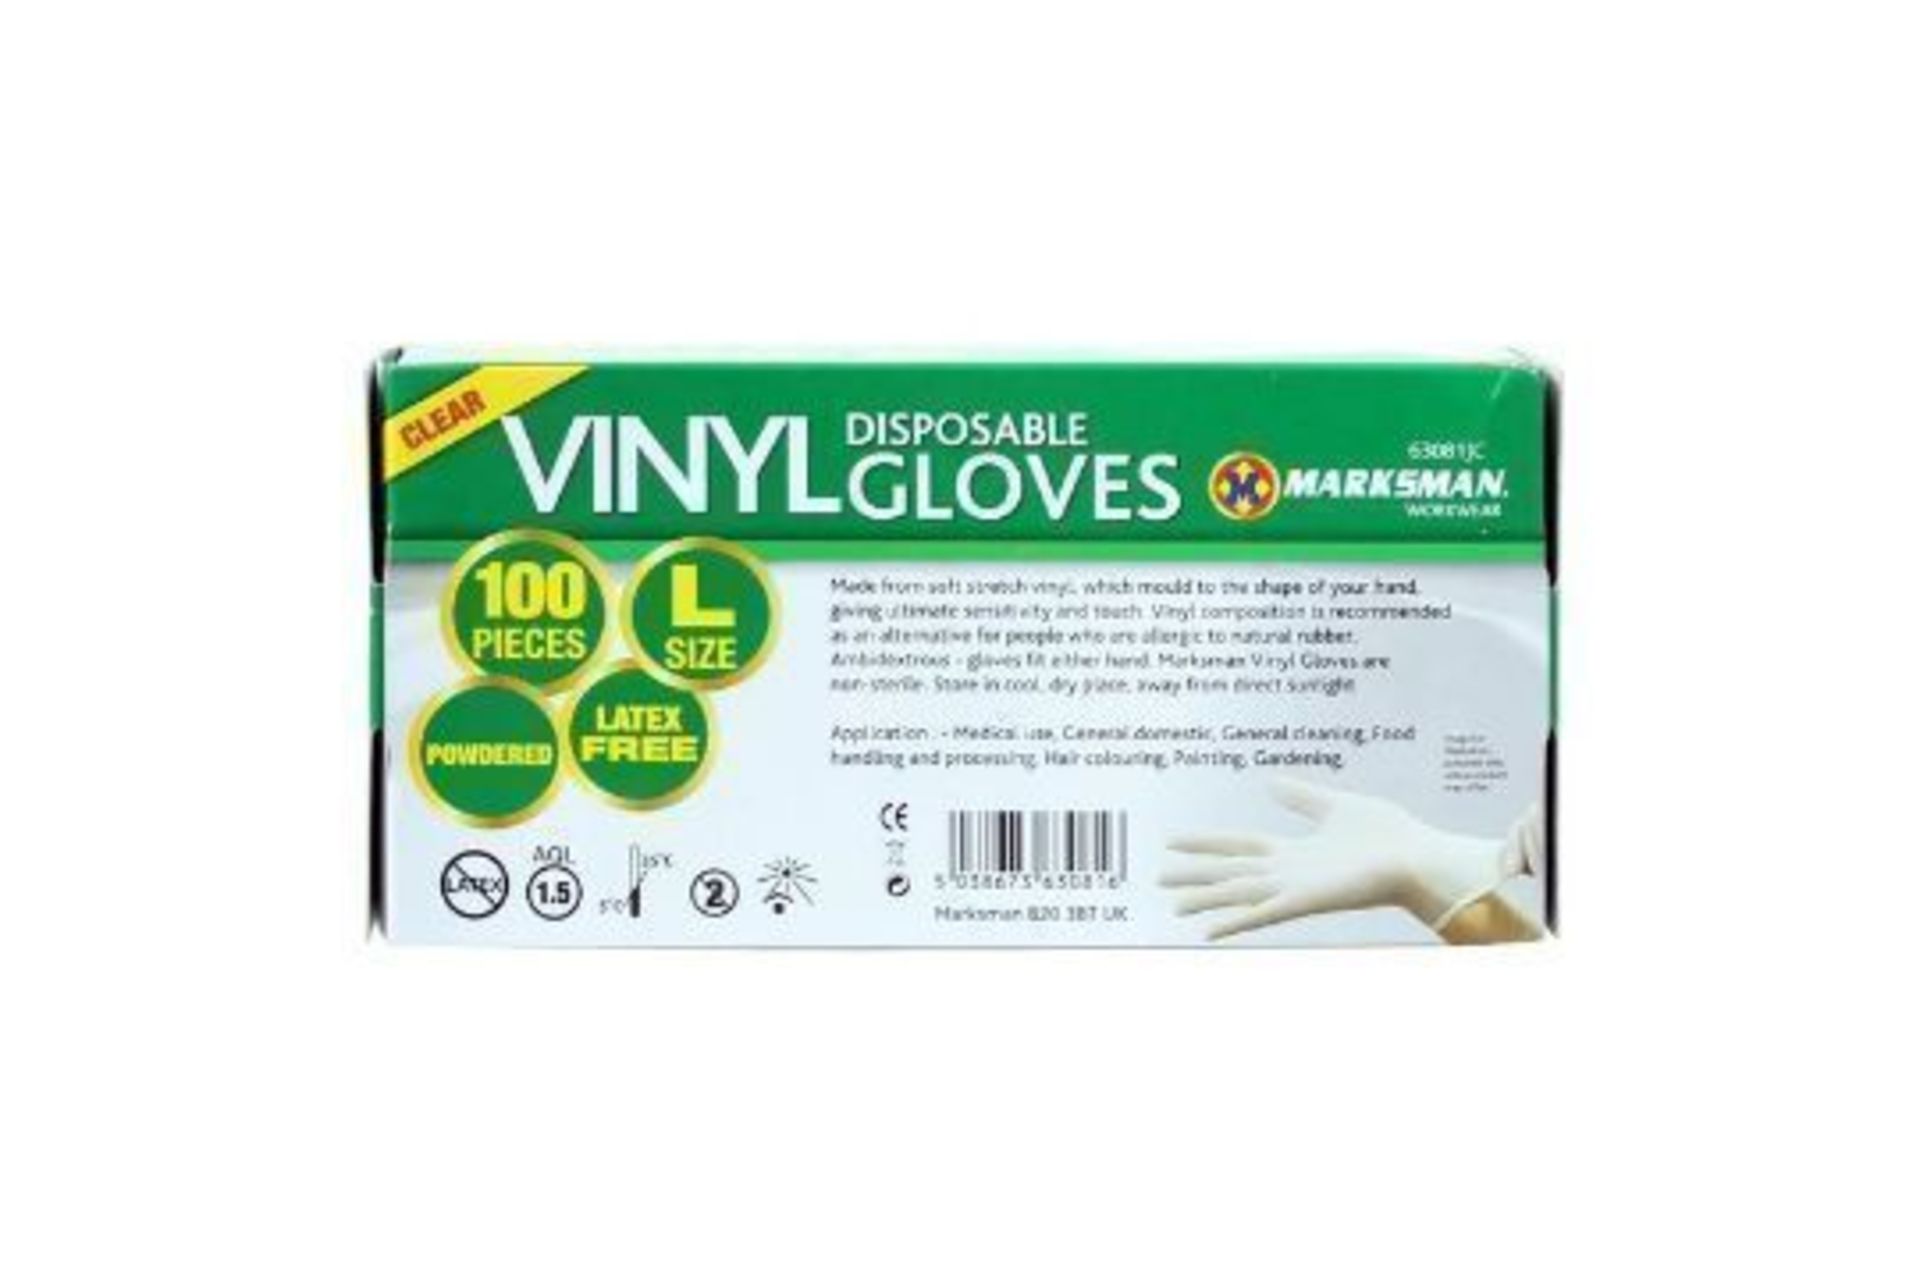 New Marksman Powdered Disposable Vinyle Gloves (SIZE L)